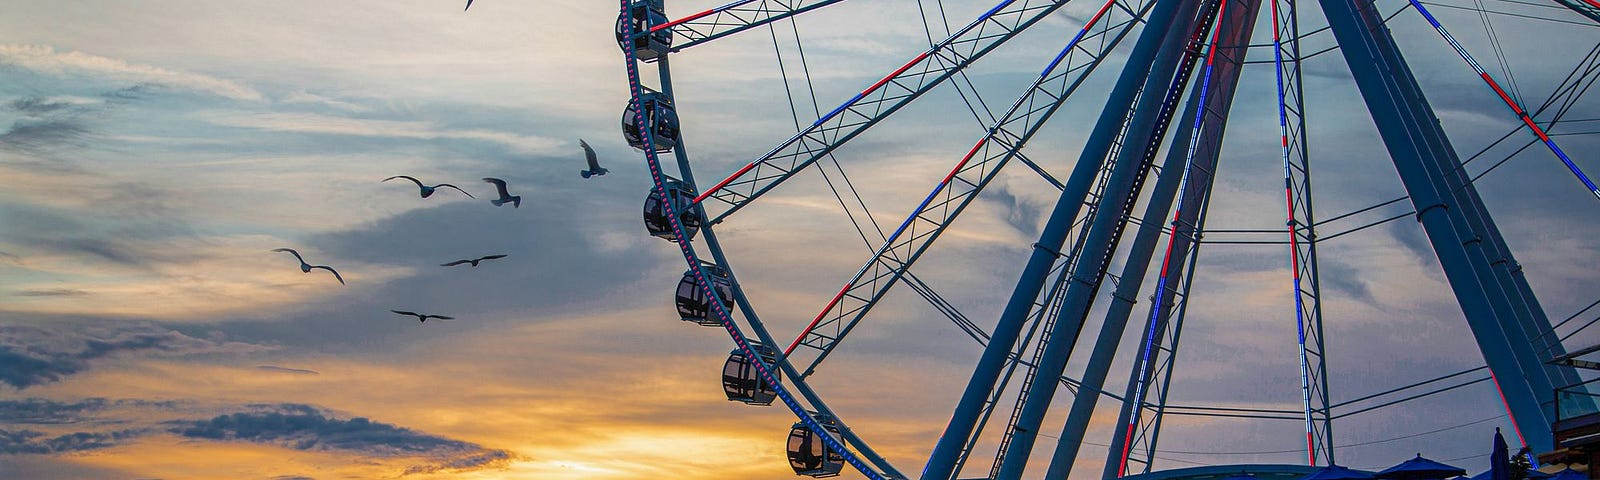 The Great Wheel in Seattle at Sunset